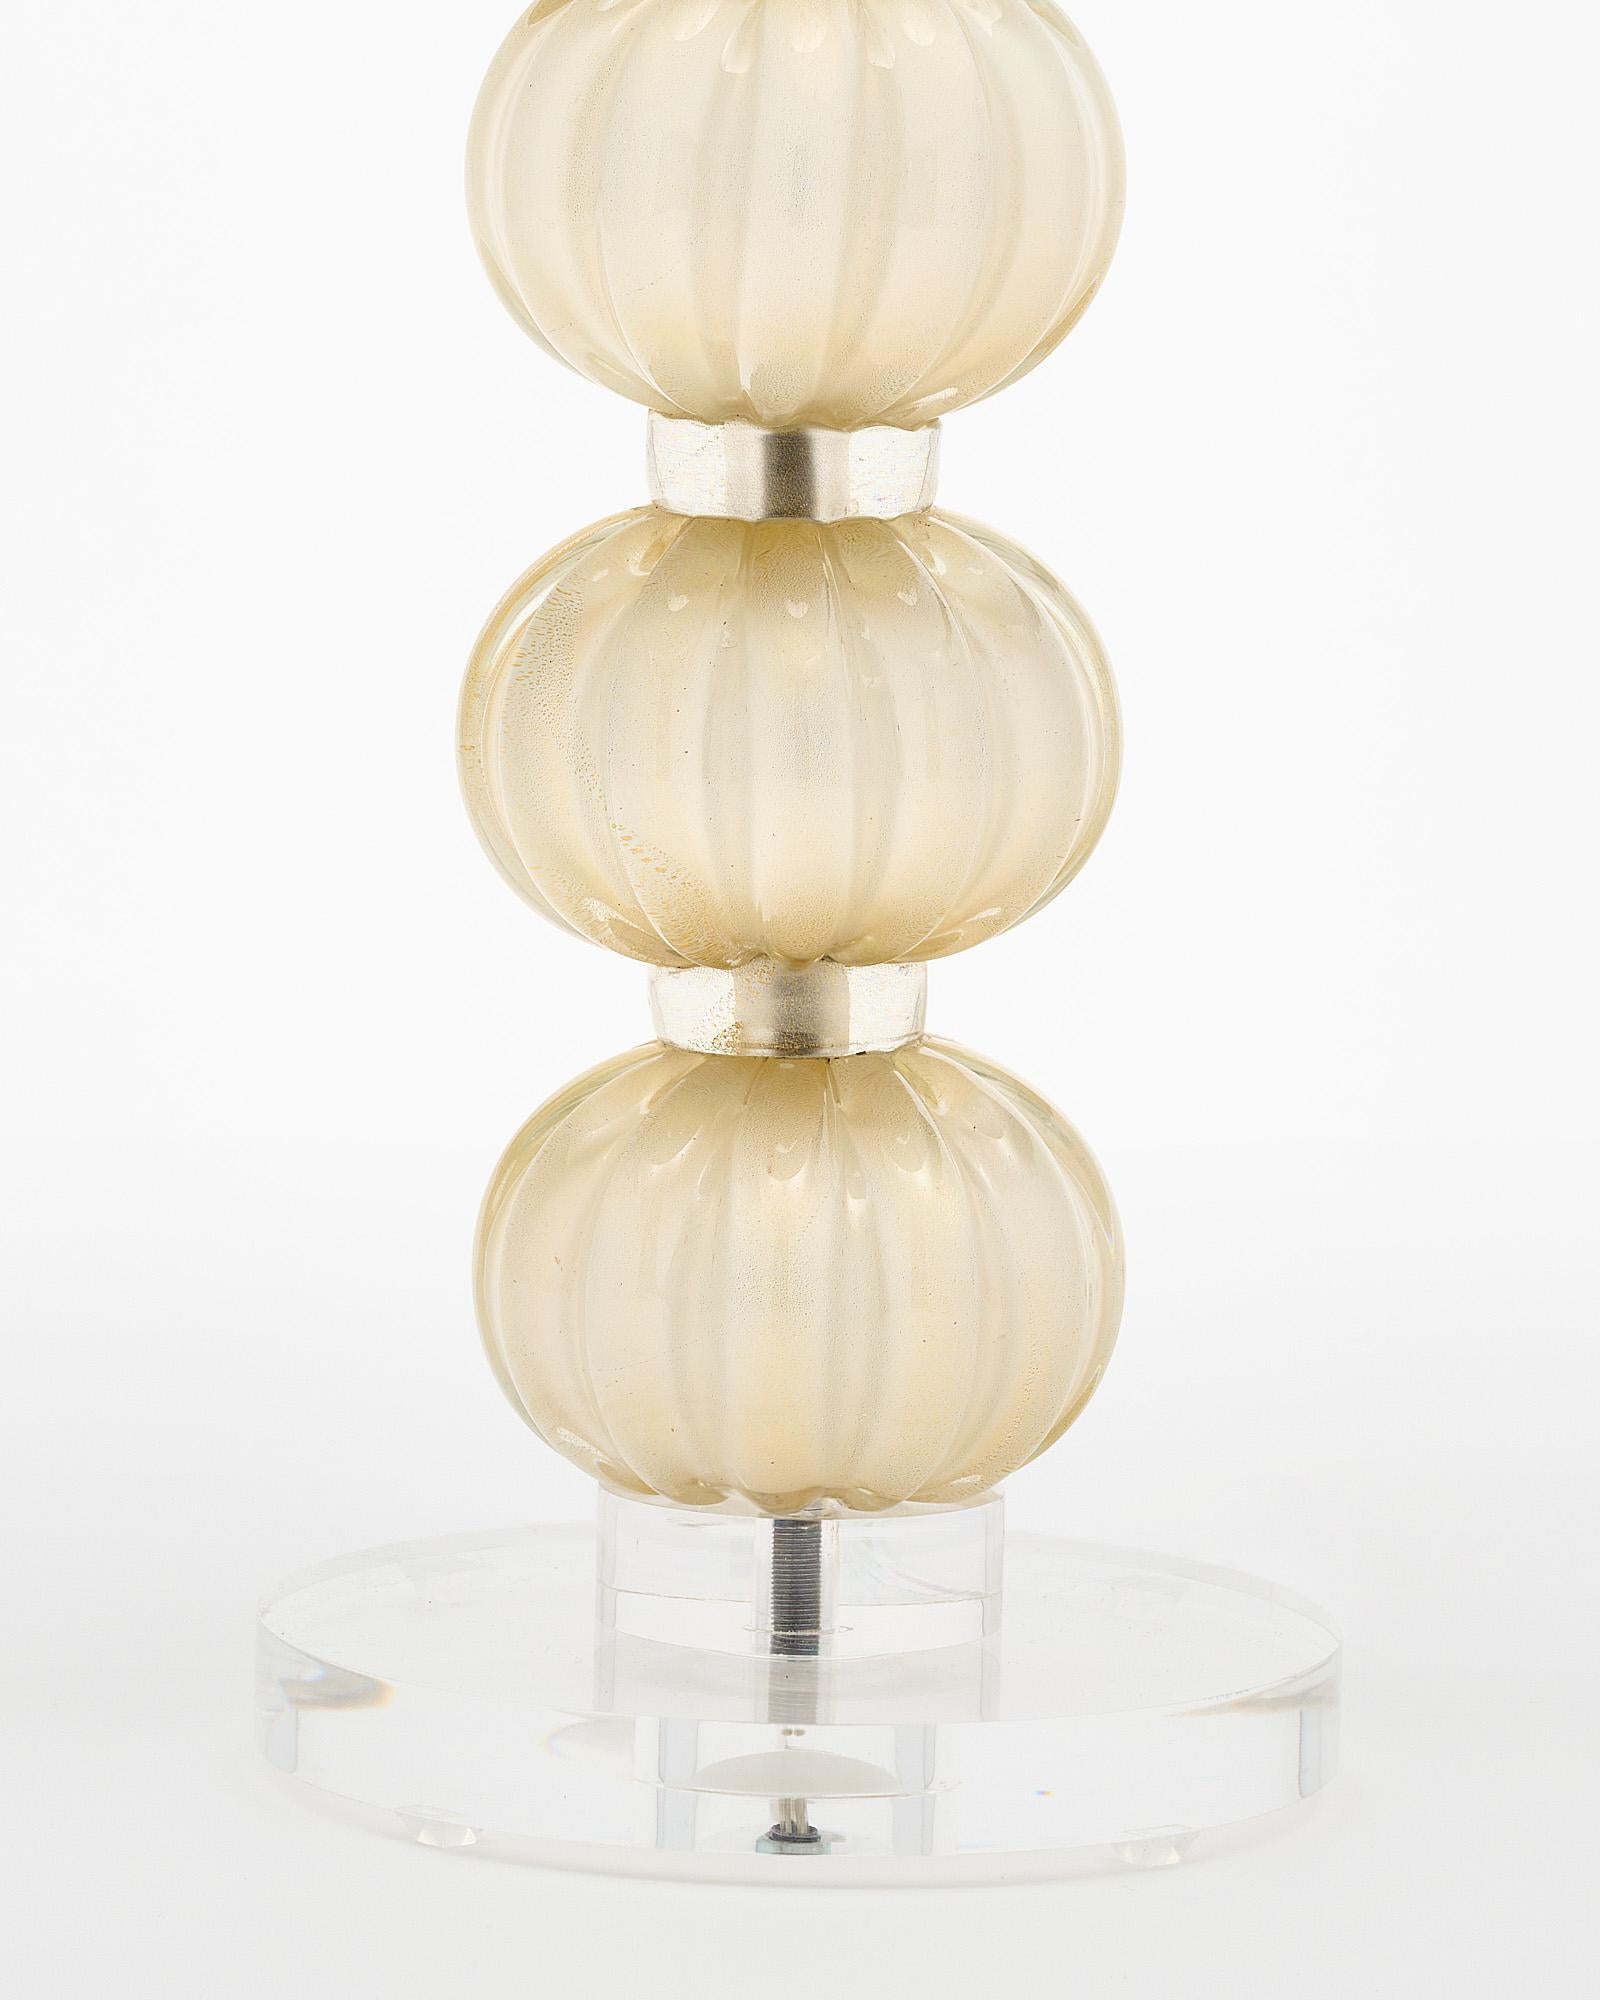 Single lamp from Murano, Italy made of hand-blown glass spheres with ridges and 24 carat gold powder fused into the glass. It sits atop a Lucite base. It has been newly wired to fit US standards.
